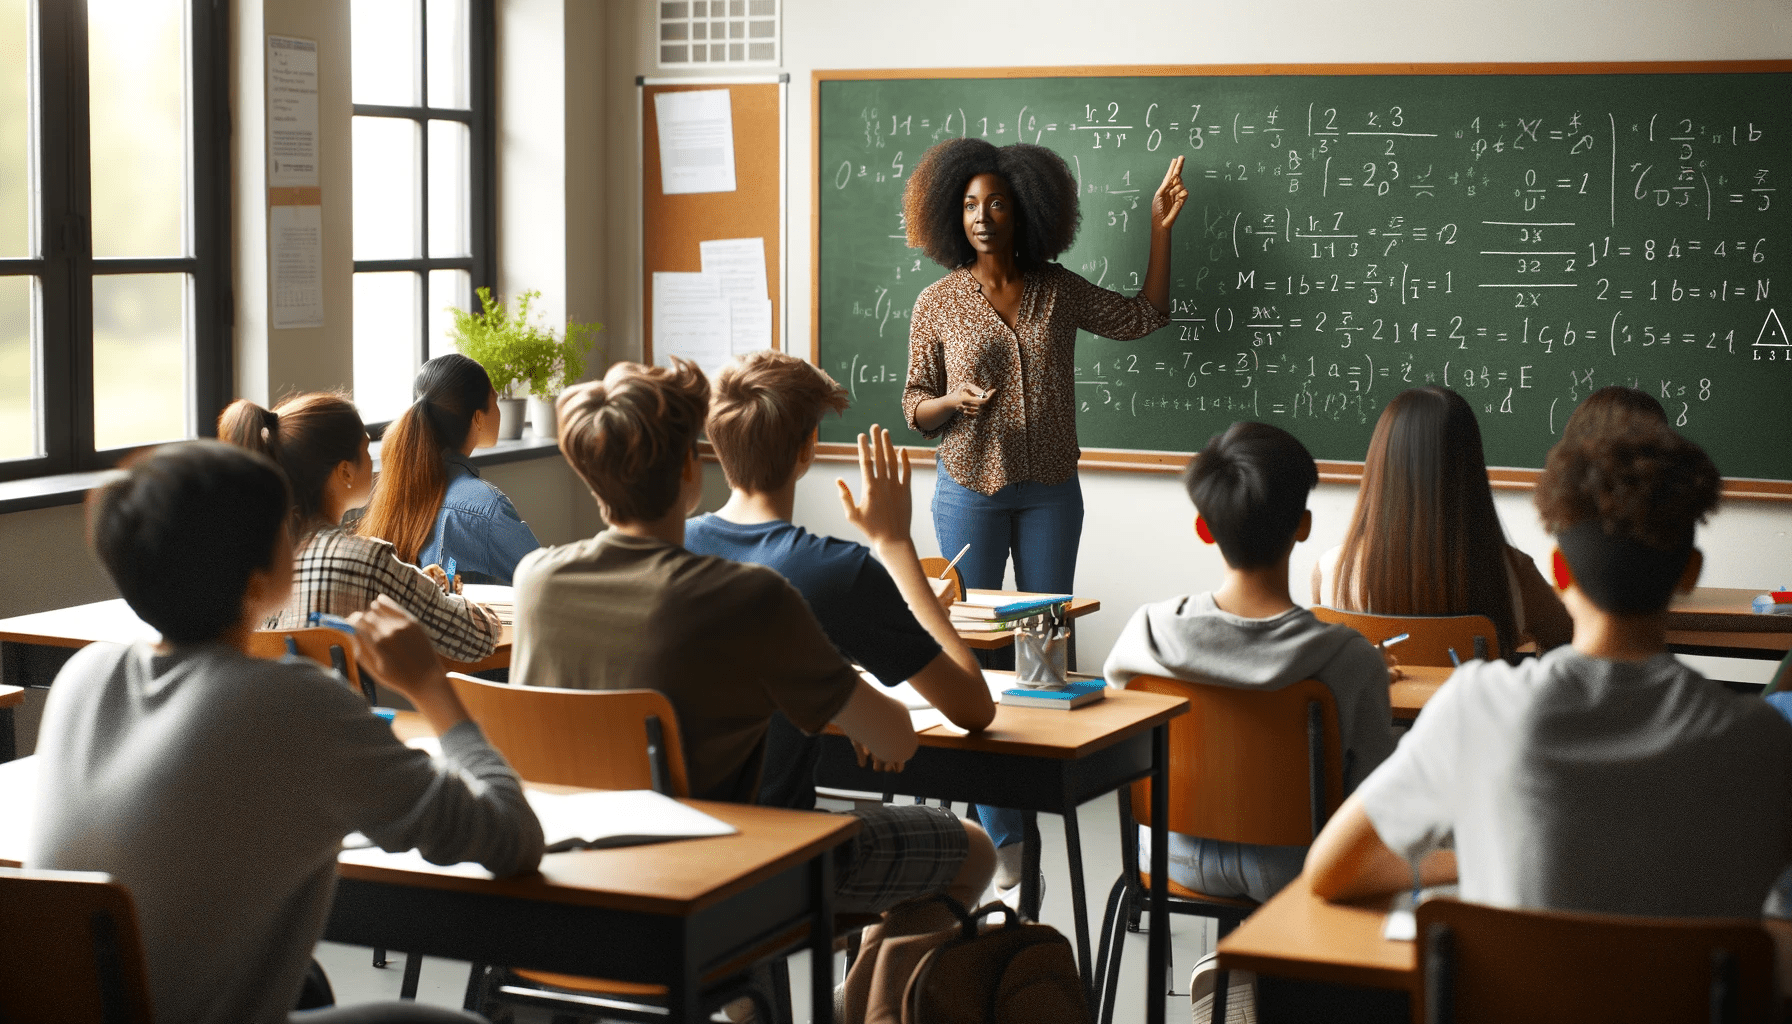 a teacher standing at the front near a blackboard interacting with diverse students sitting at their desks. The teacher a Bla